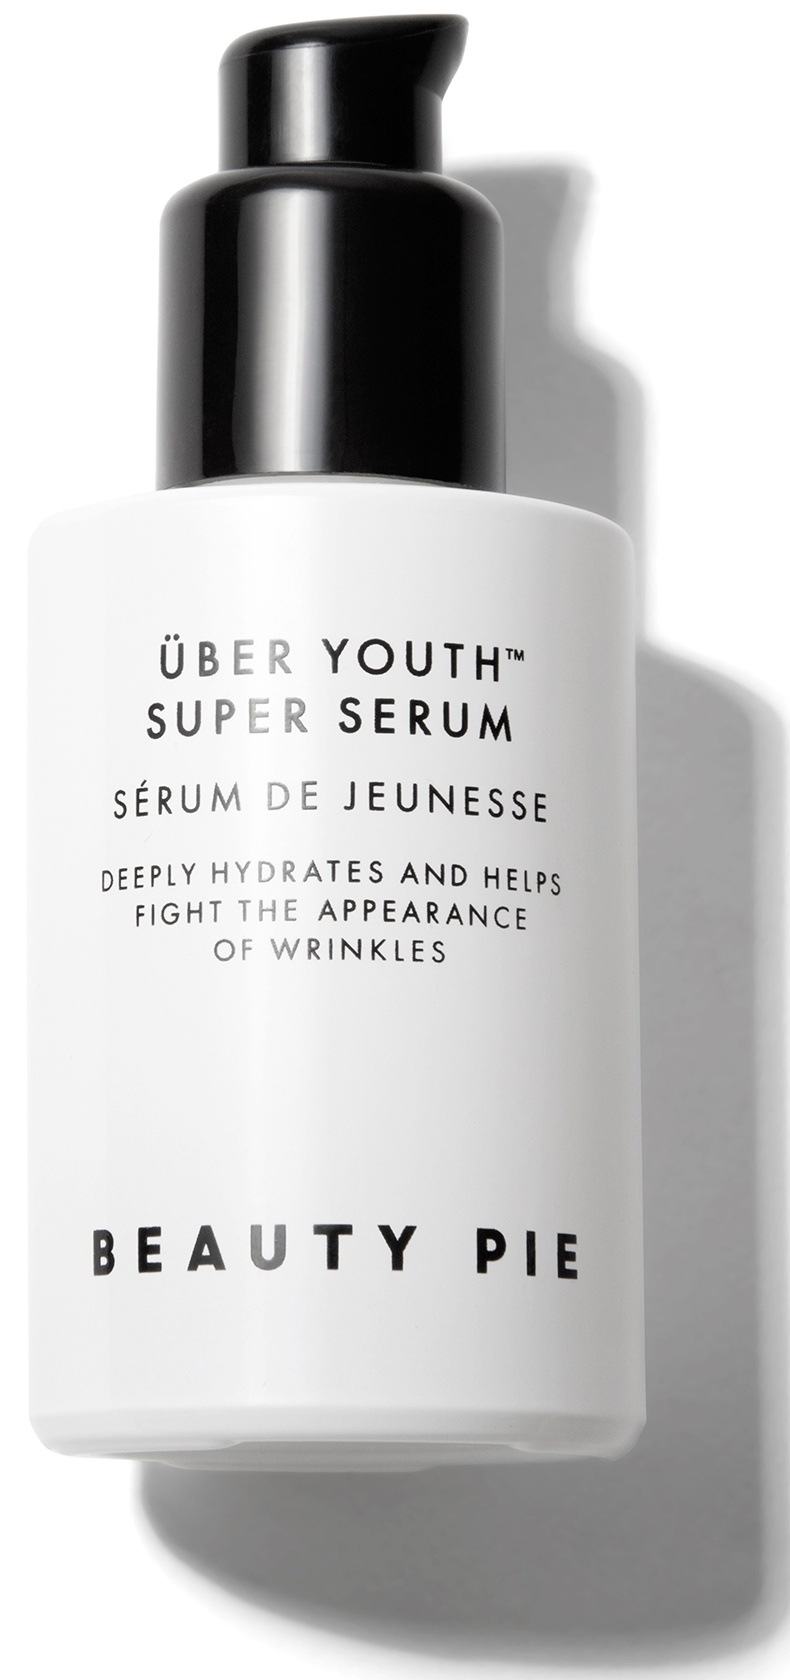 Beauty Pie Über Youth Super Serum ingredients (Explained)